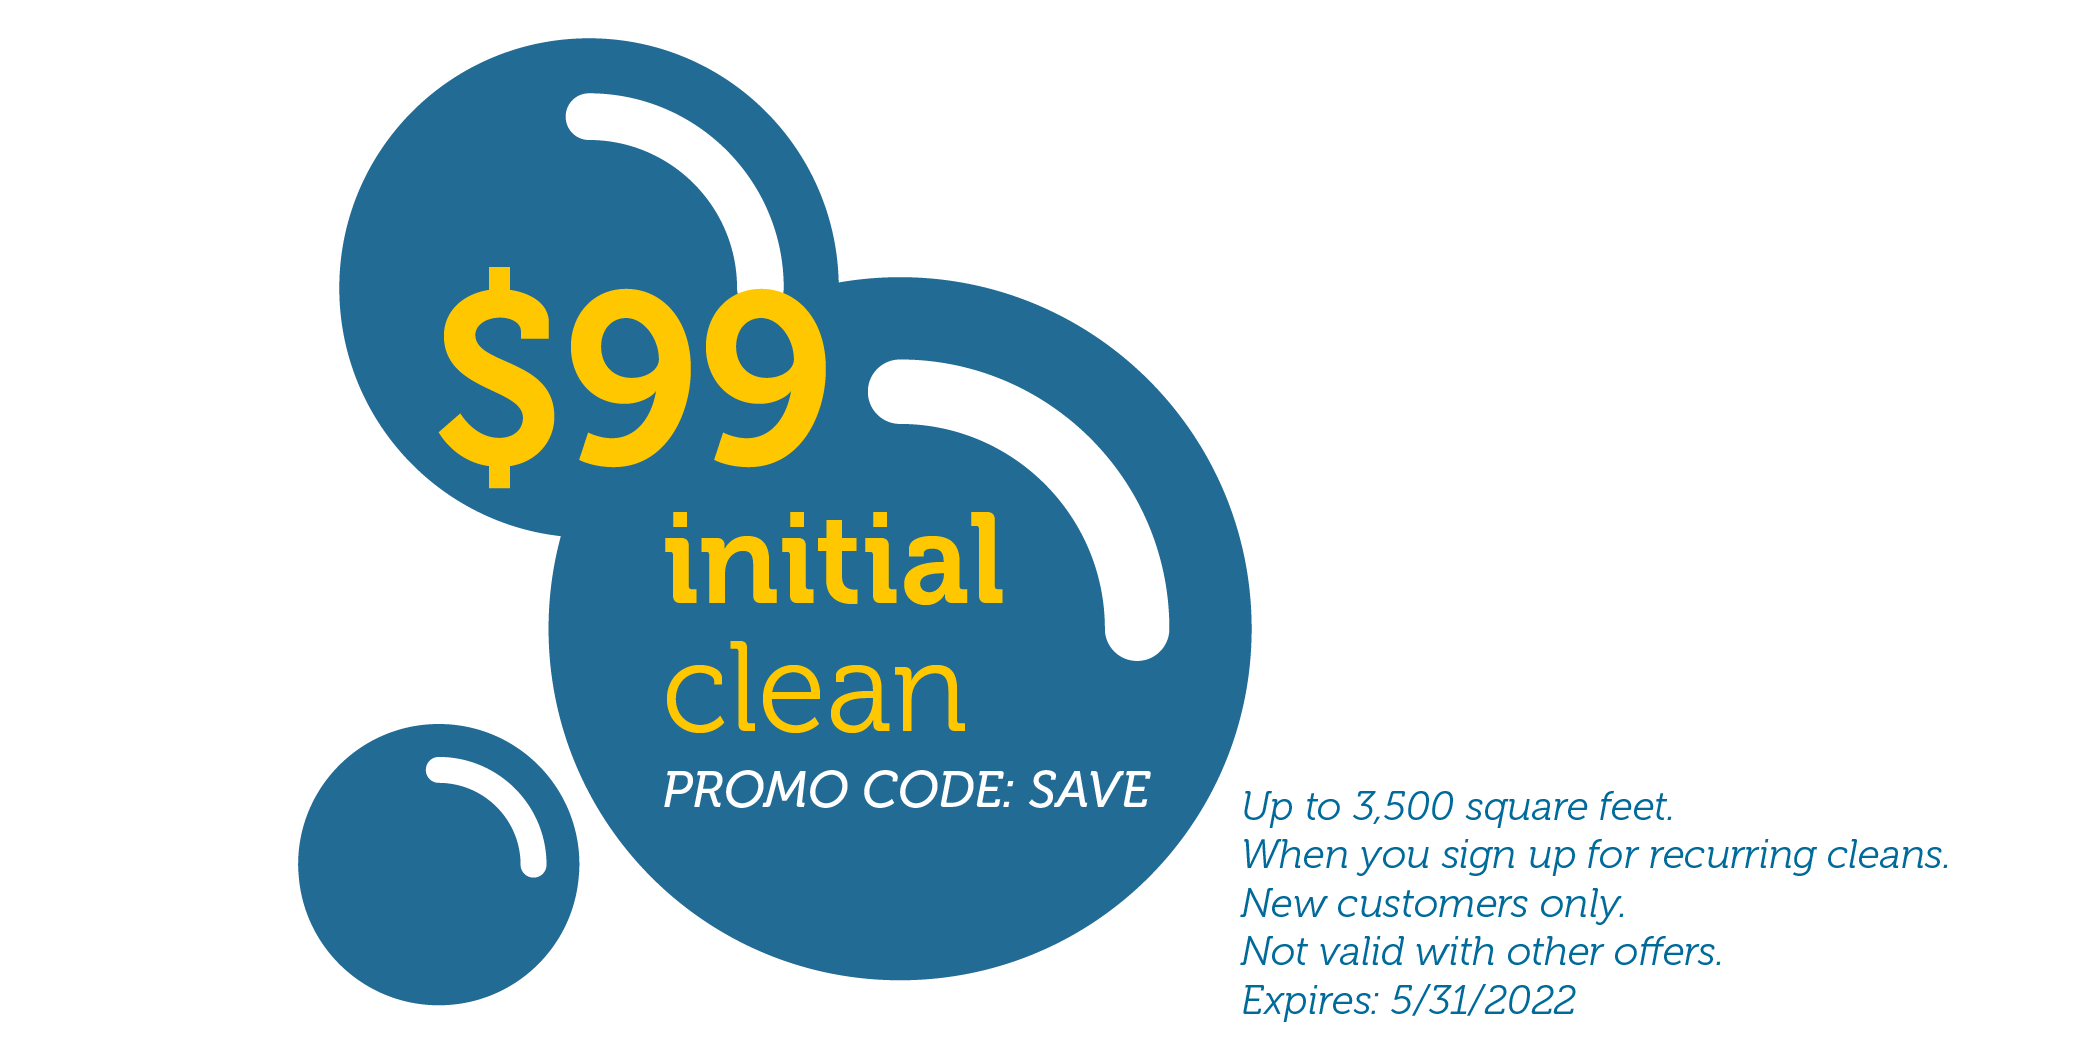 $99 initial clean coupon on bubbles